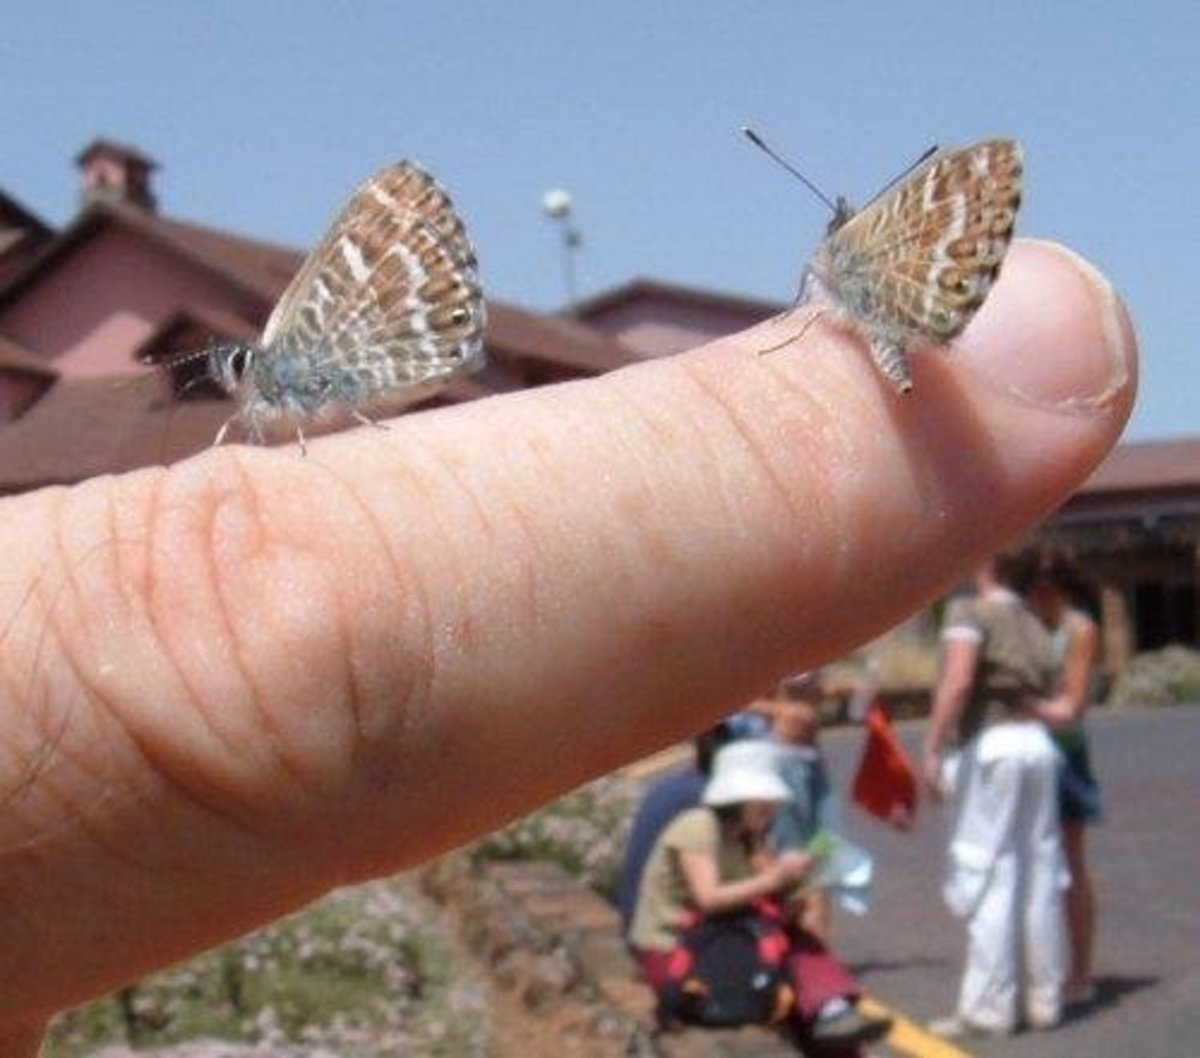 The Monarch butterfly and other Tenerife butterflies found in the Canary Islands